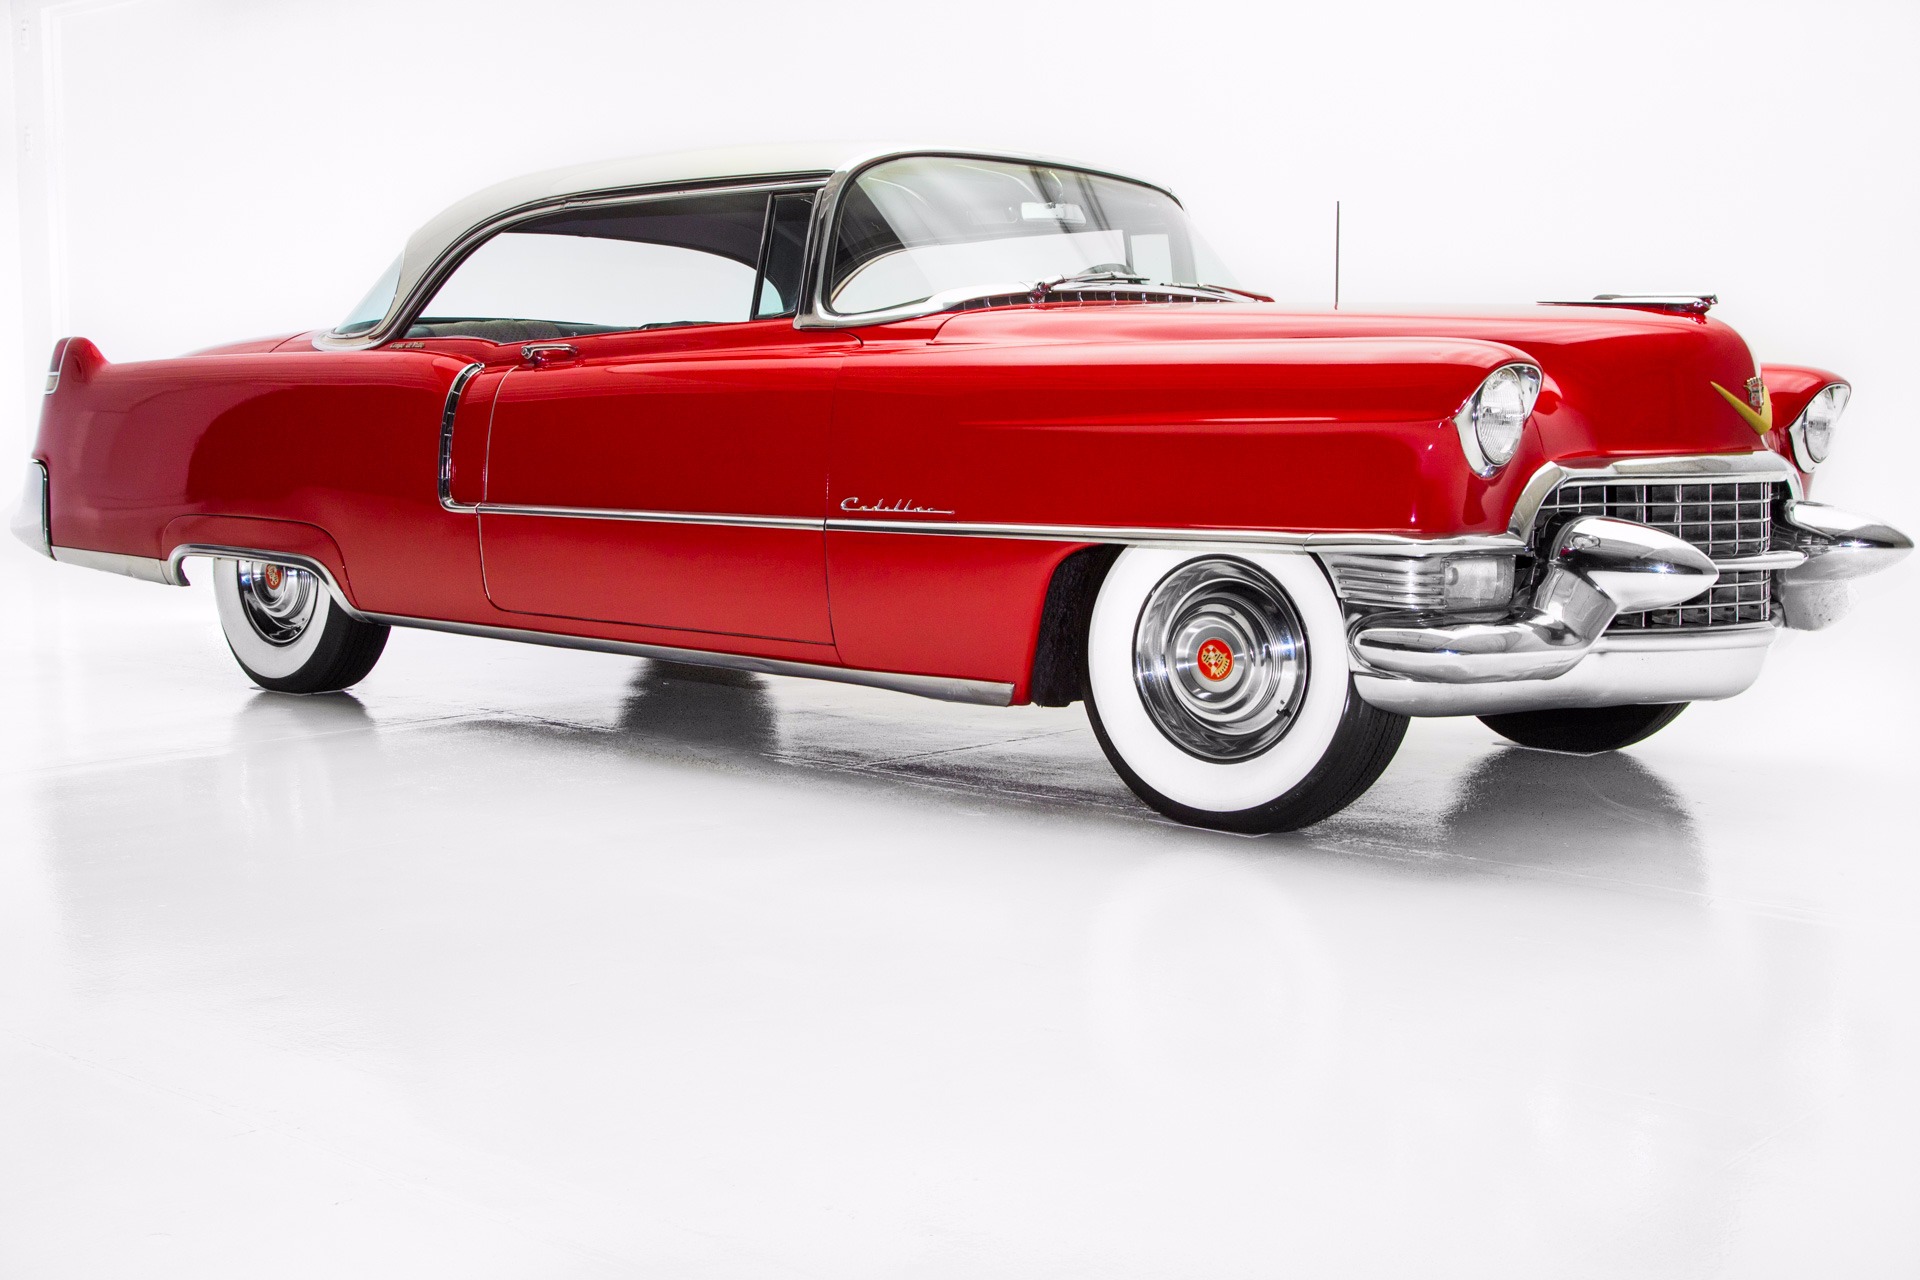 1955 Cadillac Coupe Deville Very Well Preserved Survivor